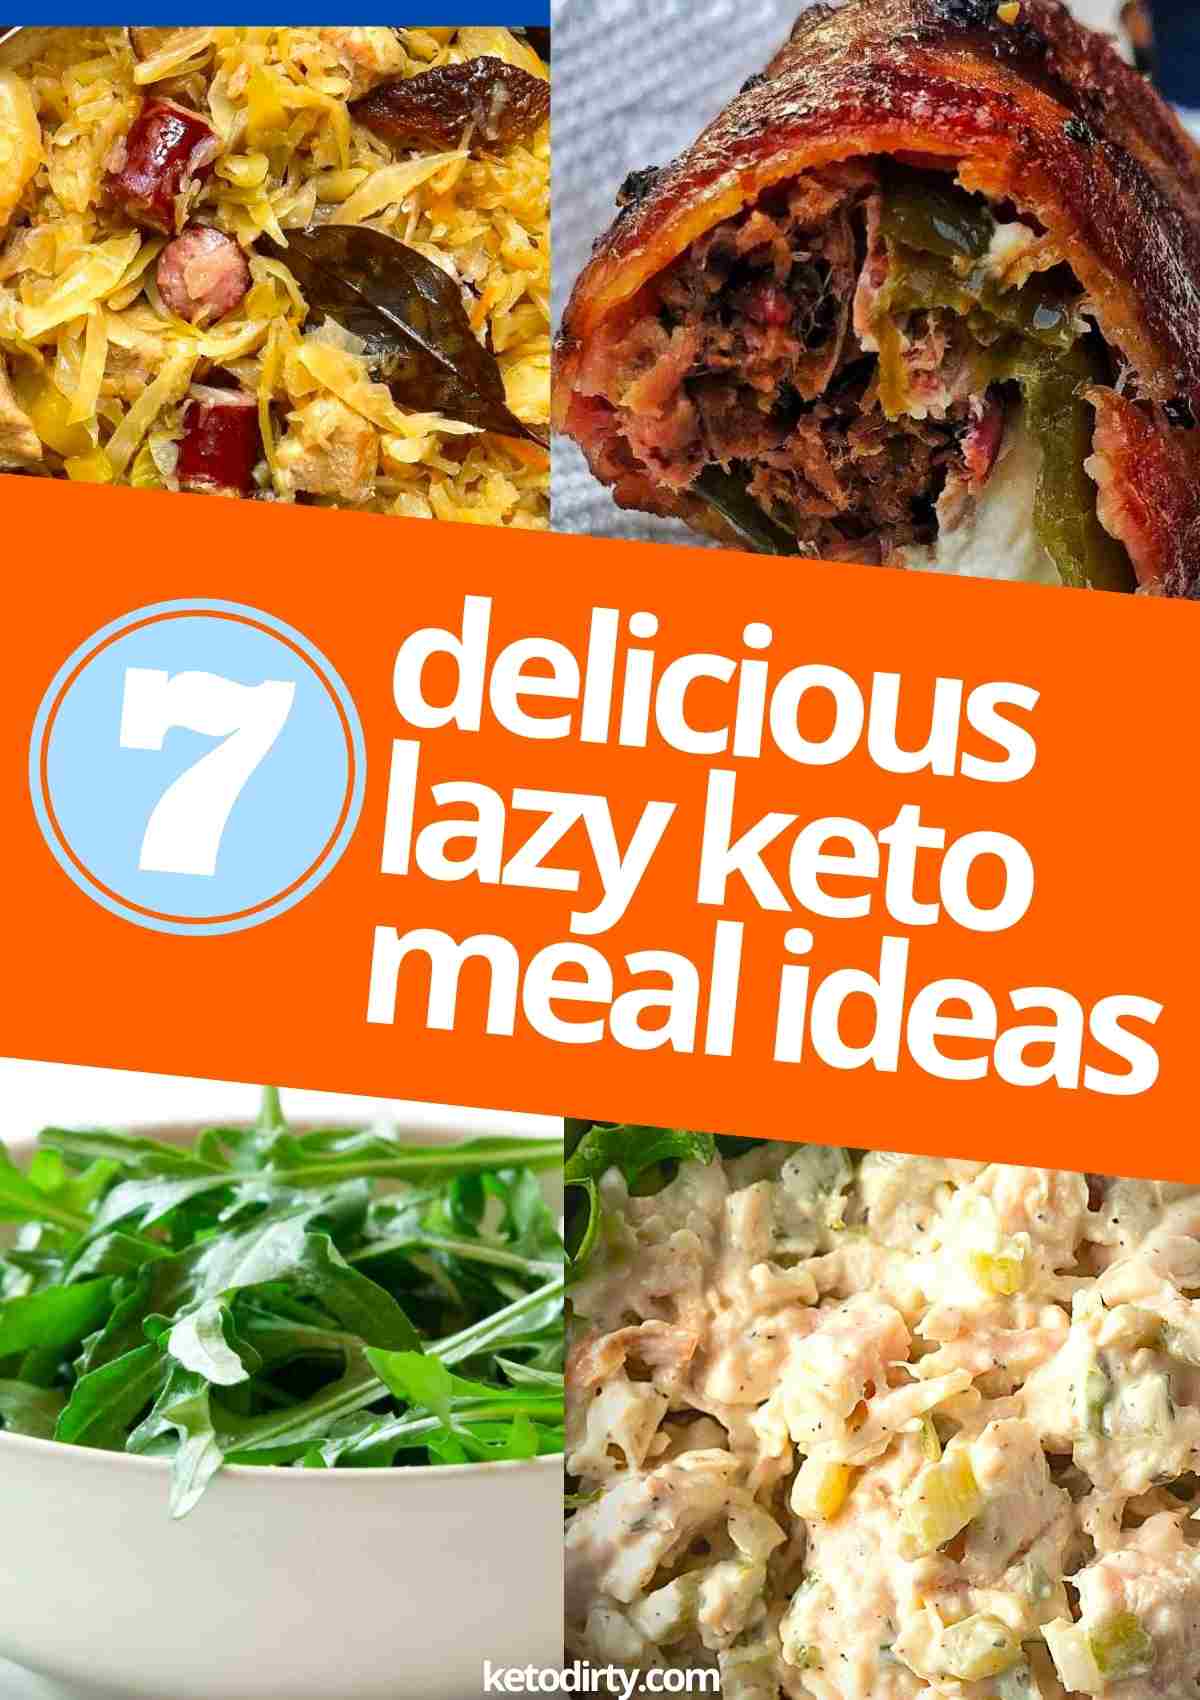 Lazy Keto Meals 7 Delicious Recipes You Need To Try